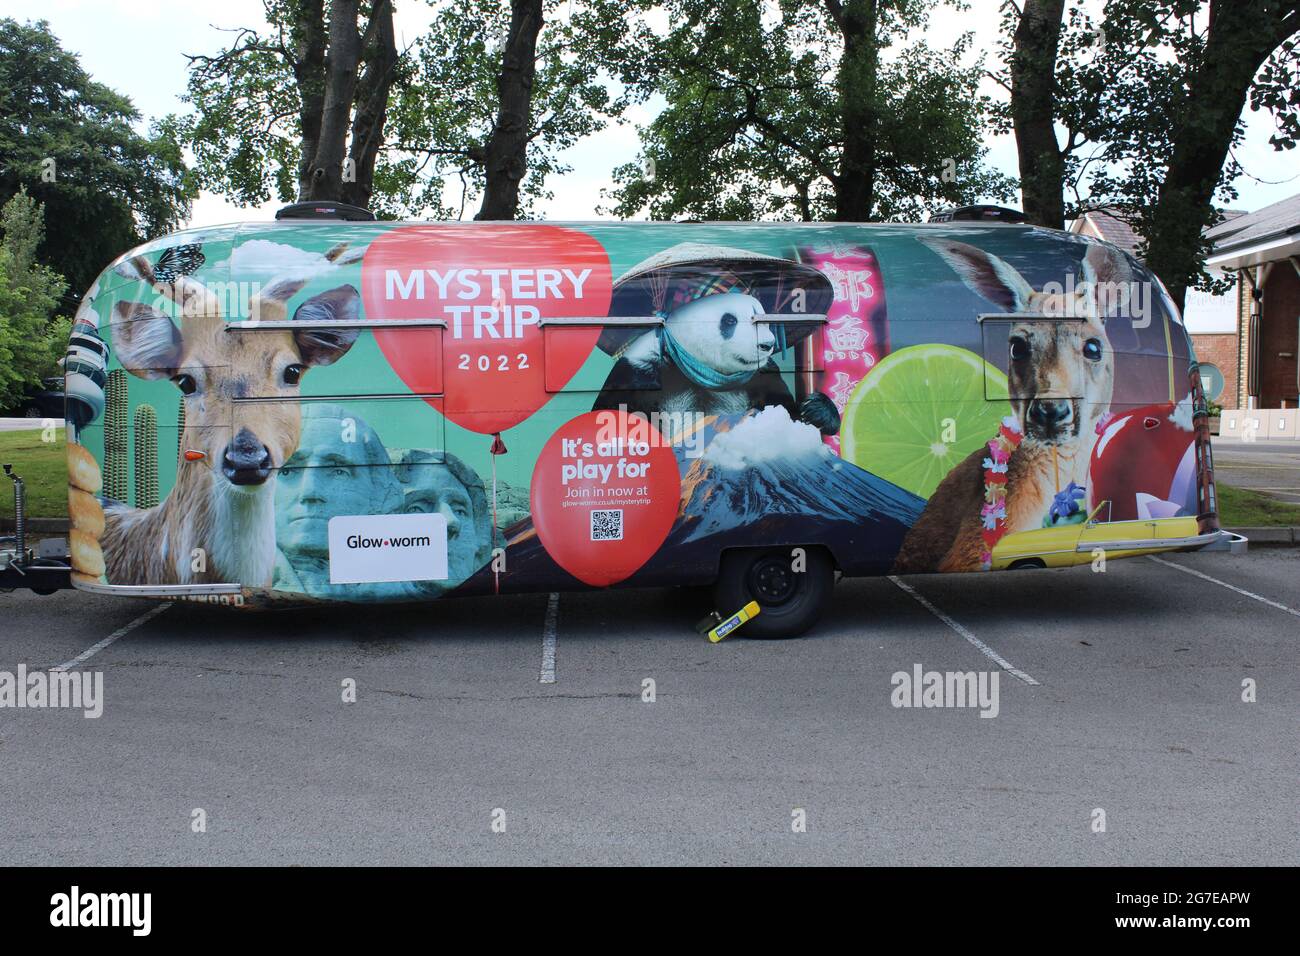 Airstream Travel Trailer Brightly Coloured With Wild Animals Painted On The Side In A Carpark In Wrightington Uk Stock Photo Alamy